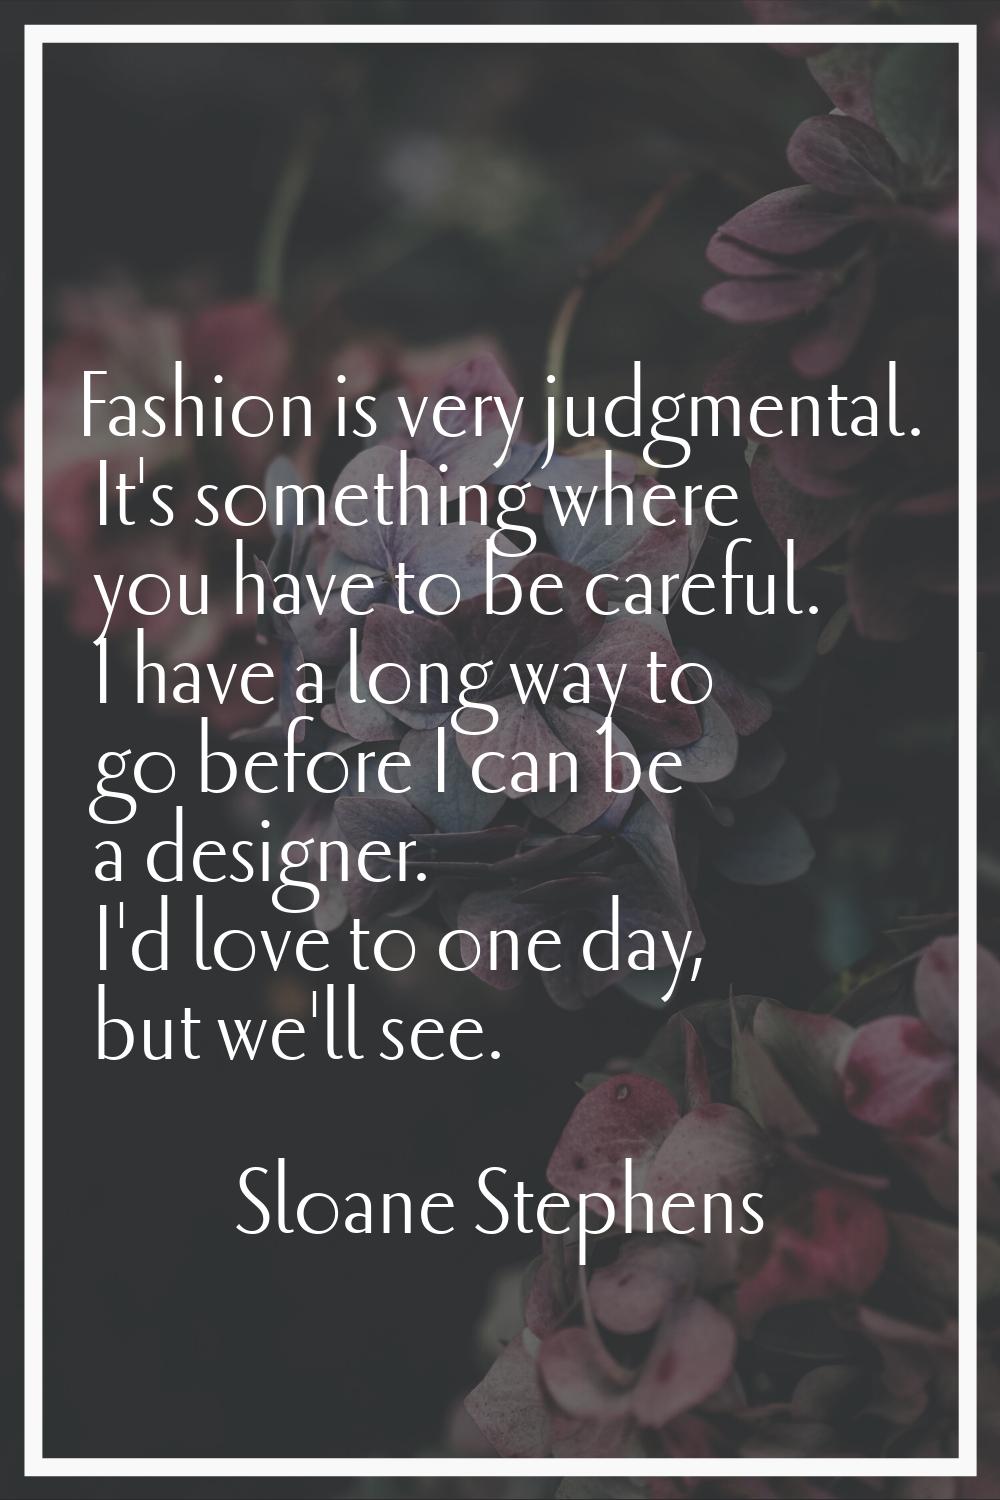 Fashion is very judgmental. It's something where you have to be careful. I have a long way to go be